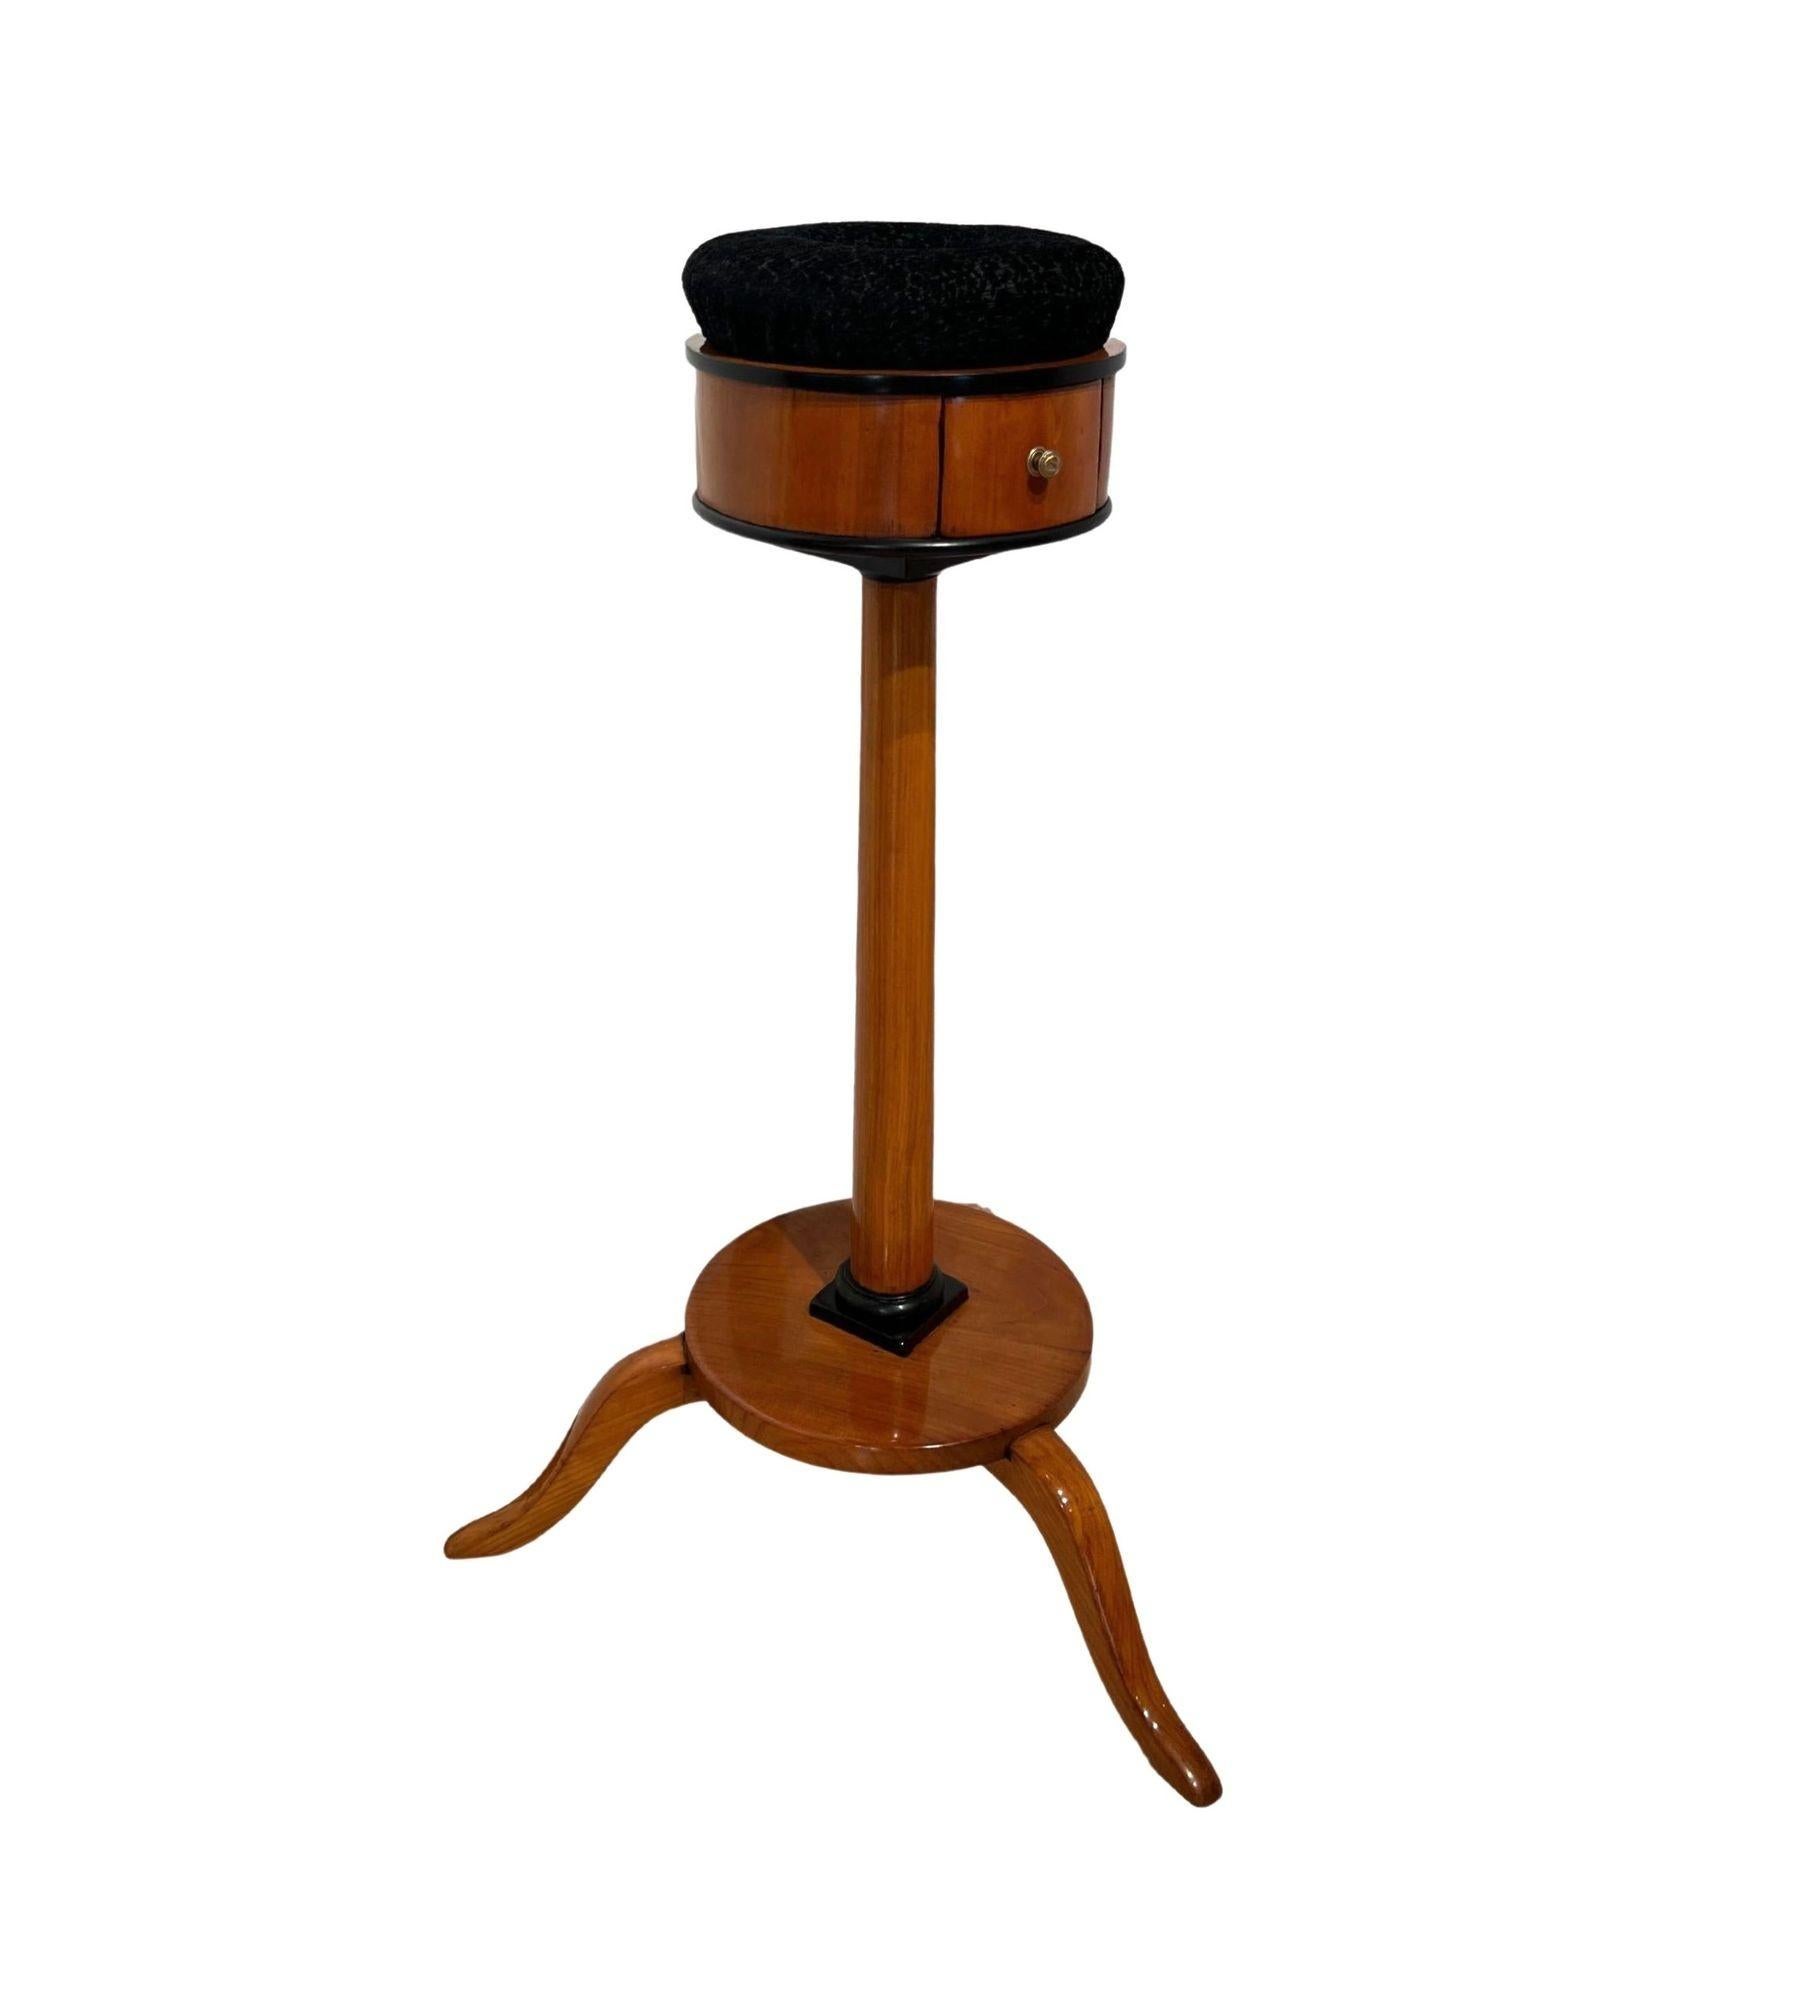 Biedermeier Sewing Stand, Cherry Wood, South Germany circa 1825

Rare, very fine Biedermeier sewing stand. Cherry wood veneered and solid, hand polished with shellac. Round pincushion with new black structured velvet fabric. Small drawer on the